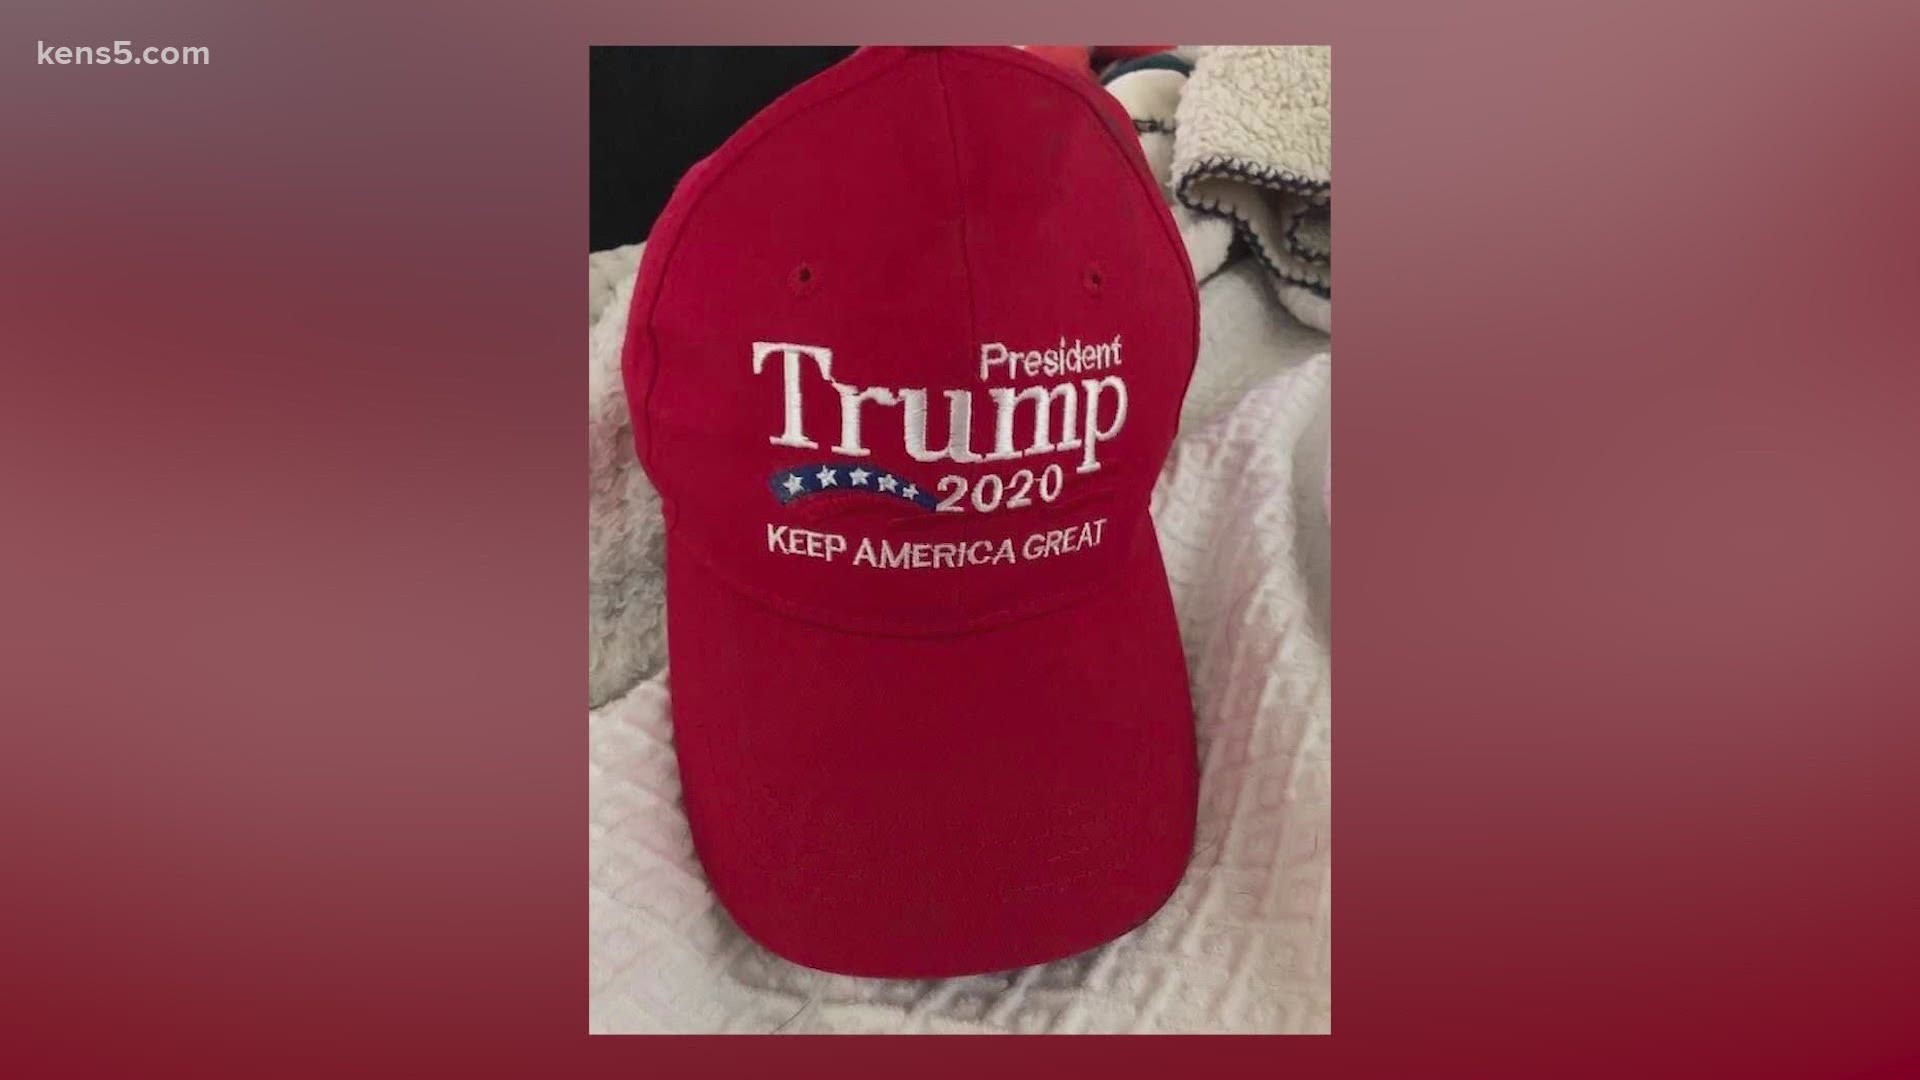 Two people were hurt in a brawl over a Trump campaign hat at a convenience store in Kerrville. Here's what residents had to say about the incident.